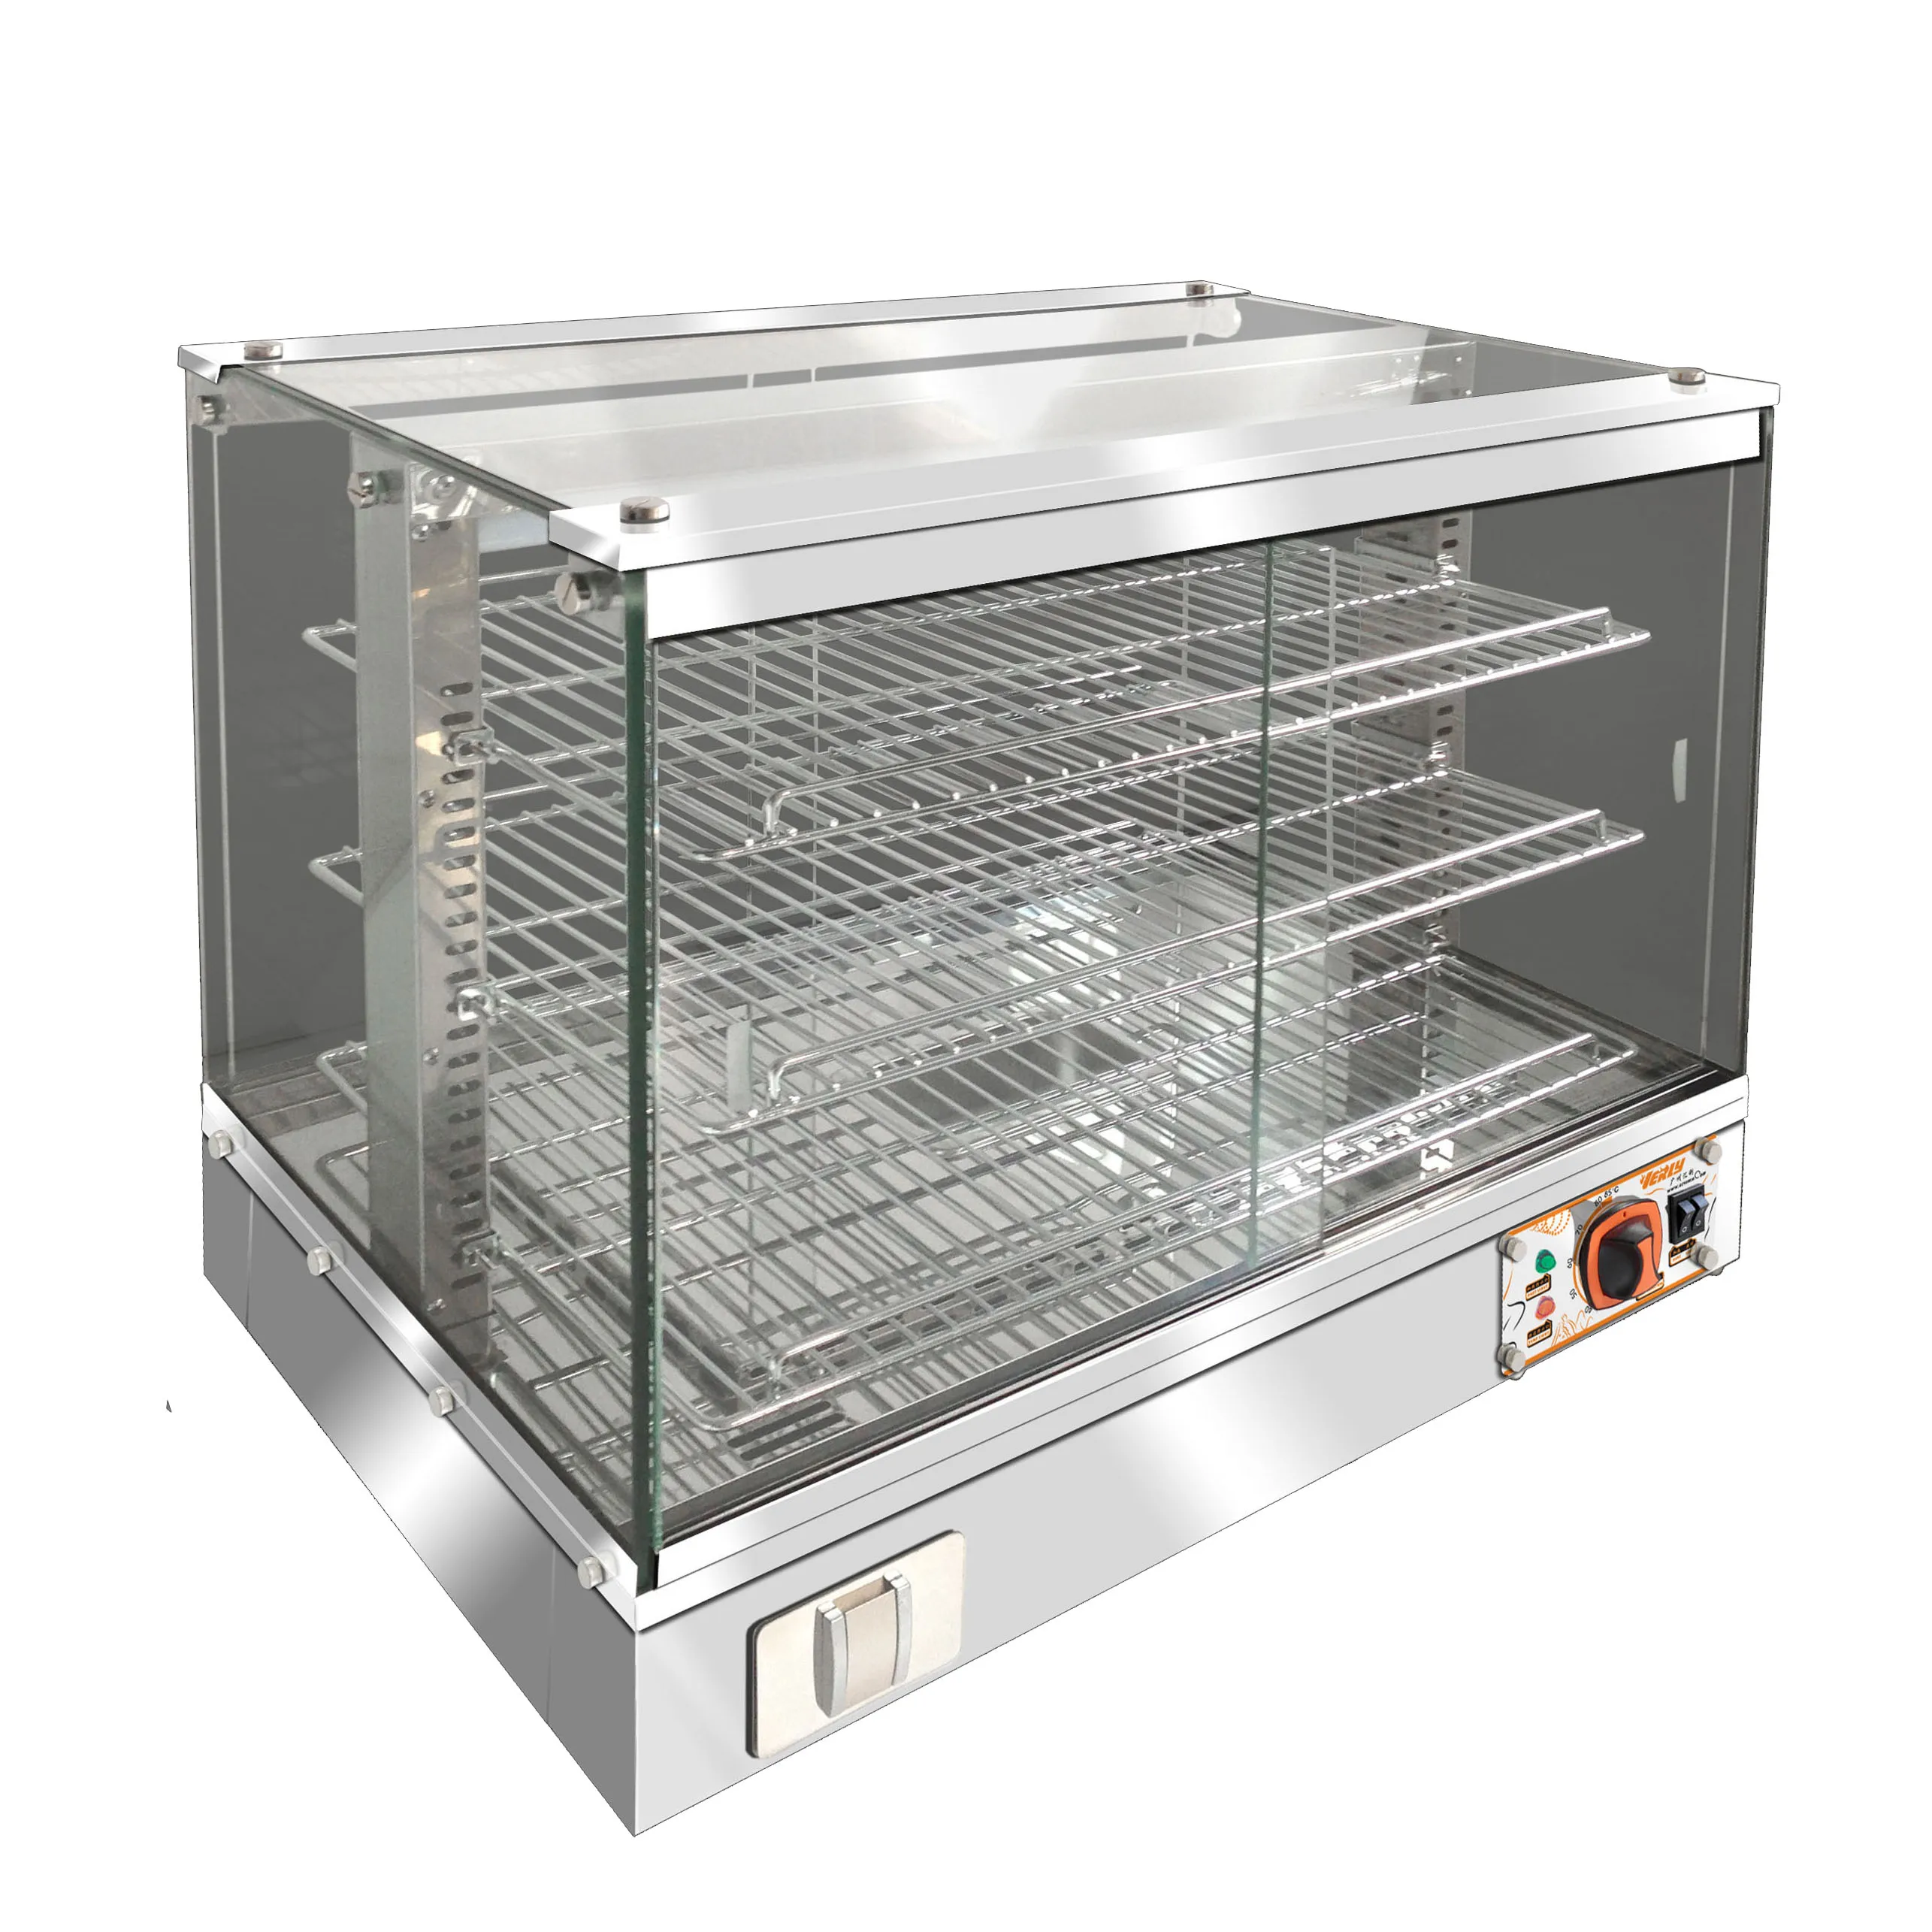 https://ae01.alicdn.com/kf/Sa9251a0073d74960a6a6fc1ec500dbd8F/Commercial-Stainless-Steel-3-Layers-Food-Warmer-Display-Cooked-Egg-Tart-Cake-Cabinet-Showcase.jpg